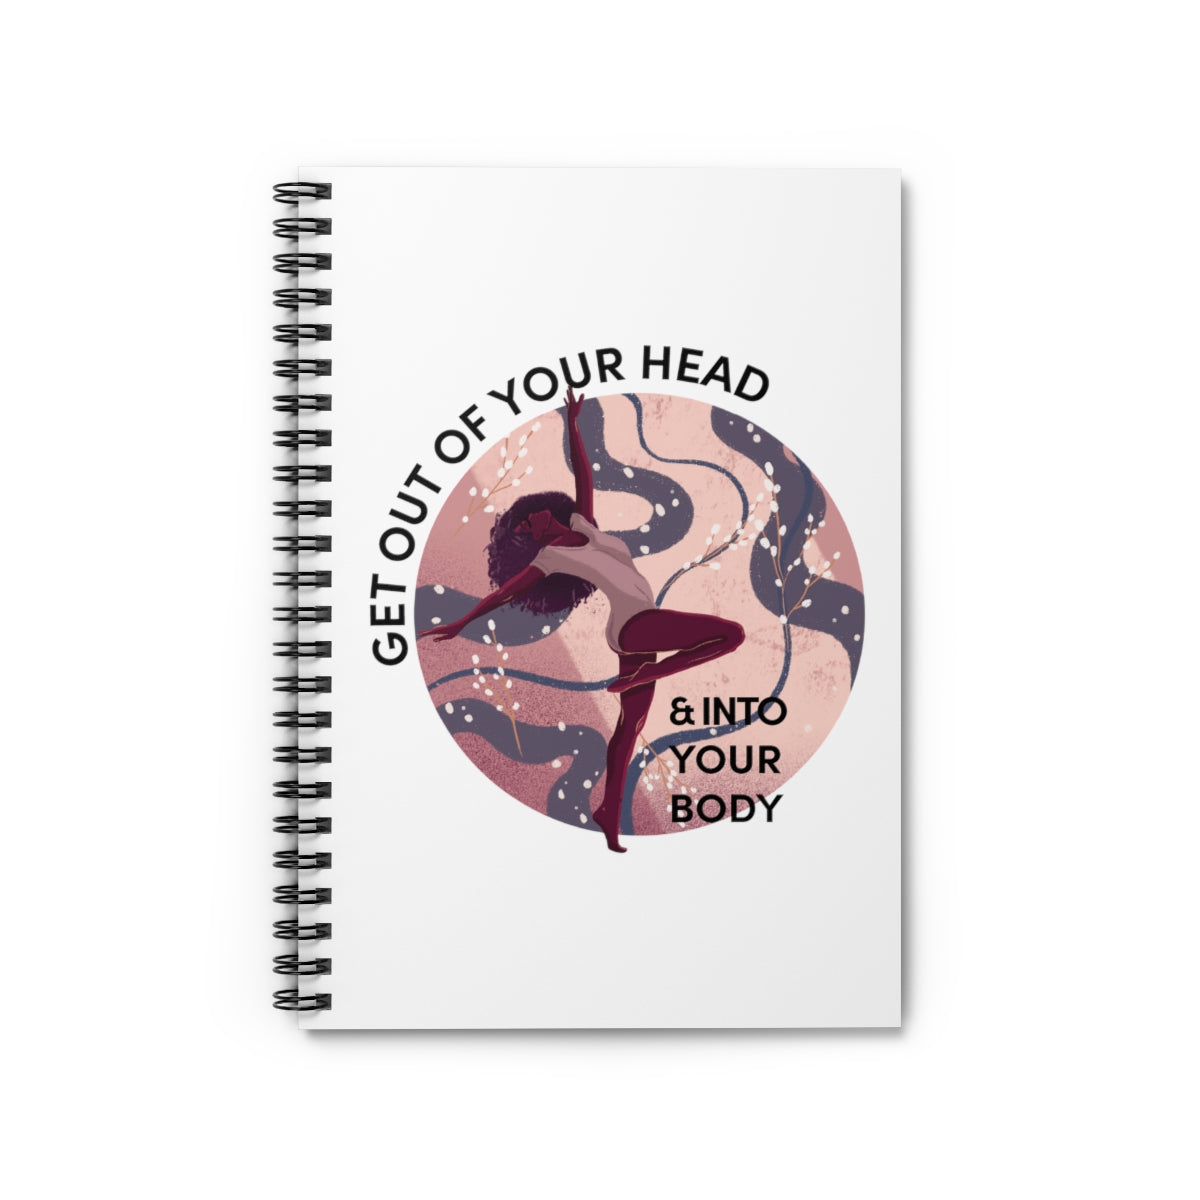 Get Out of Your Head – BL - Spiral Notebook - Ruled Line